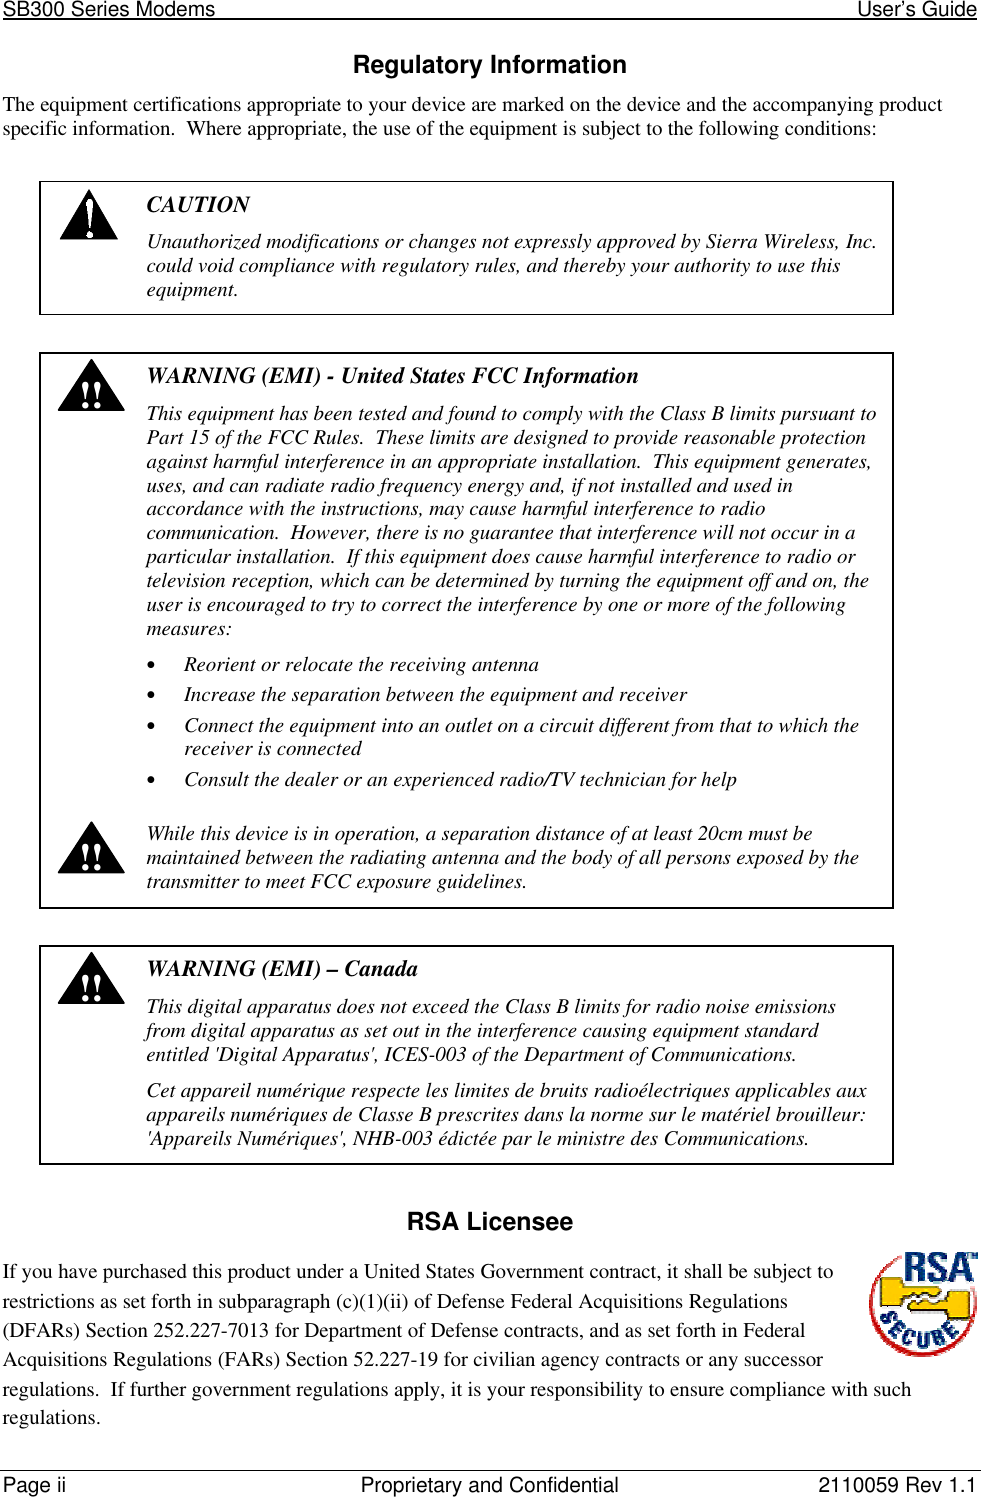 SB300 Series Modems                                                                                                            User’s GuidePage ii Proprietary and Confidential 2110059 Rev 1.1Regulatory InformationThe equipment certifications appropriate to your device are marked on the device and the accompanying productspecific information.  Where appropriate, the use of the equipment is subject to the following conditions:CAUTIONUnauthorized modifications or changes not expressly approved by Sierra Wireless, Inc.could void compliance with regulatory rules, and thereby your authority to use thisequipment.!!!!WARNING (EMI) - United States FCC InformationThis equipment has been tested and found to comply with the Class B limits pursuant toPart 15 of the FCC Rules.  These limits are designed to provide reasonable protectionagainst harmful interference in an appropriate installation.  This equipment generates,uses, and can radiate radio frequency energy and, if not installed and used inaccordance with the instructions, may cause harmful interference to radiocommunication.  However, there is no guarantee that interference will not occur in aparticular installation.  If this equipment does cause harmful interference to radio ortelevision reception, which can be determined by turning the equipment off and on, theuser is encouraged to try to correct the interference by one or more of the followingmeasures:• Reorient or relocate the receiving antenna• Increase the separation between the equipment and receiver• Connect the equipment into an outlet on a circuit different from that to which thereceiver is connected• Consult the dealer or an experienced radio/TV technician for helpWhile this device is in operation, a separation distance of at least 20cm must bemaintained between the radiating antenna and the body of all persons exposed by thetransmitter to meet FCC exposure guidelines.!!WARNING (EMI) – CanadaThis digital apparatus does not exceed the Class B limits for radio noise emissionsfrom digital apparatus as set out in the interference causing equipment standardentitled &apos;Digital Apparatus&apos;, ICES-003 of the Department of Communications.Cet appareil numérique respecte les limites de bruits radioélectriques applicables auxappareils numériques de Classe B prescrites dans la norme sur le matériel brouilleur:&apos;Appareils Numériques&apos;, NHB-003 édictée par le ministre des Communications.RSA LicenseeIf you have purchased this product under a United States Government contract, it shall be subject torestrictions as set forth in subparagraph (c)(1)(ii) of Defense Federal Acquisitions Regulations(DFARs) Section 252.227-7013 for Department of Defense contracts, and as set forth in FederalAcquisitions Regulations (FARs) Section 52.227-19 for civilian agency contracts or any successorregulations.  If further government regulations apply, it is your responsibility to ensure compliance with suchregulations.